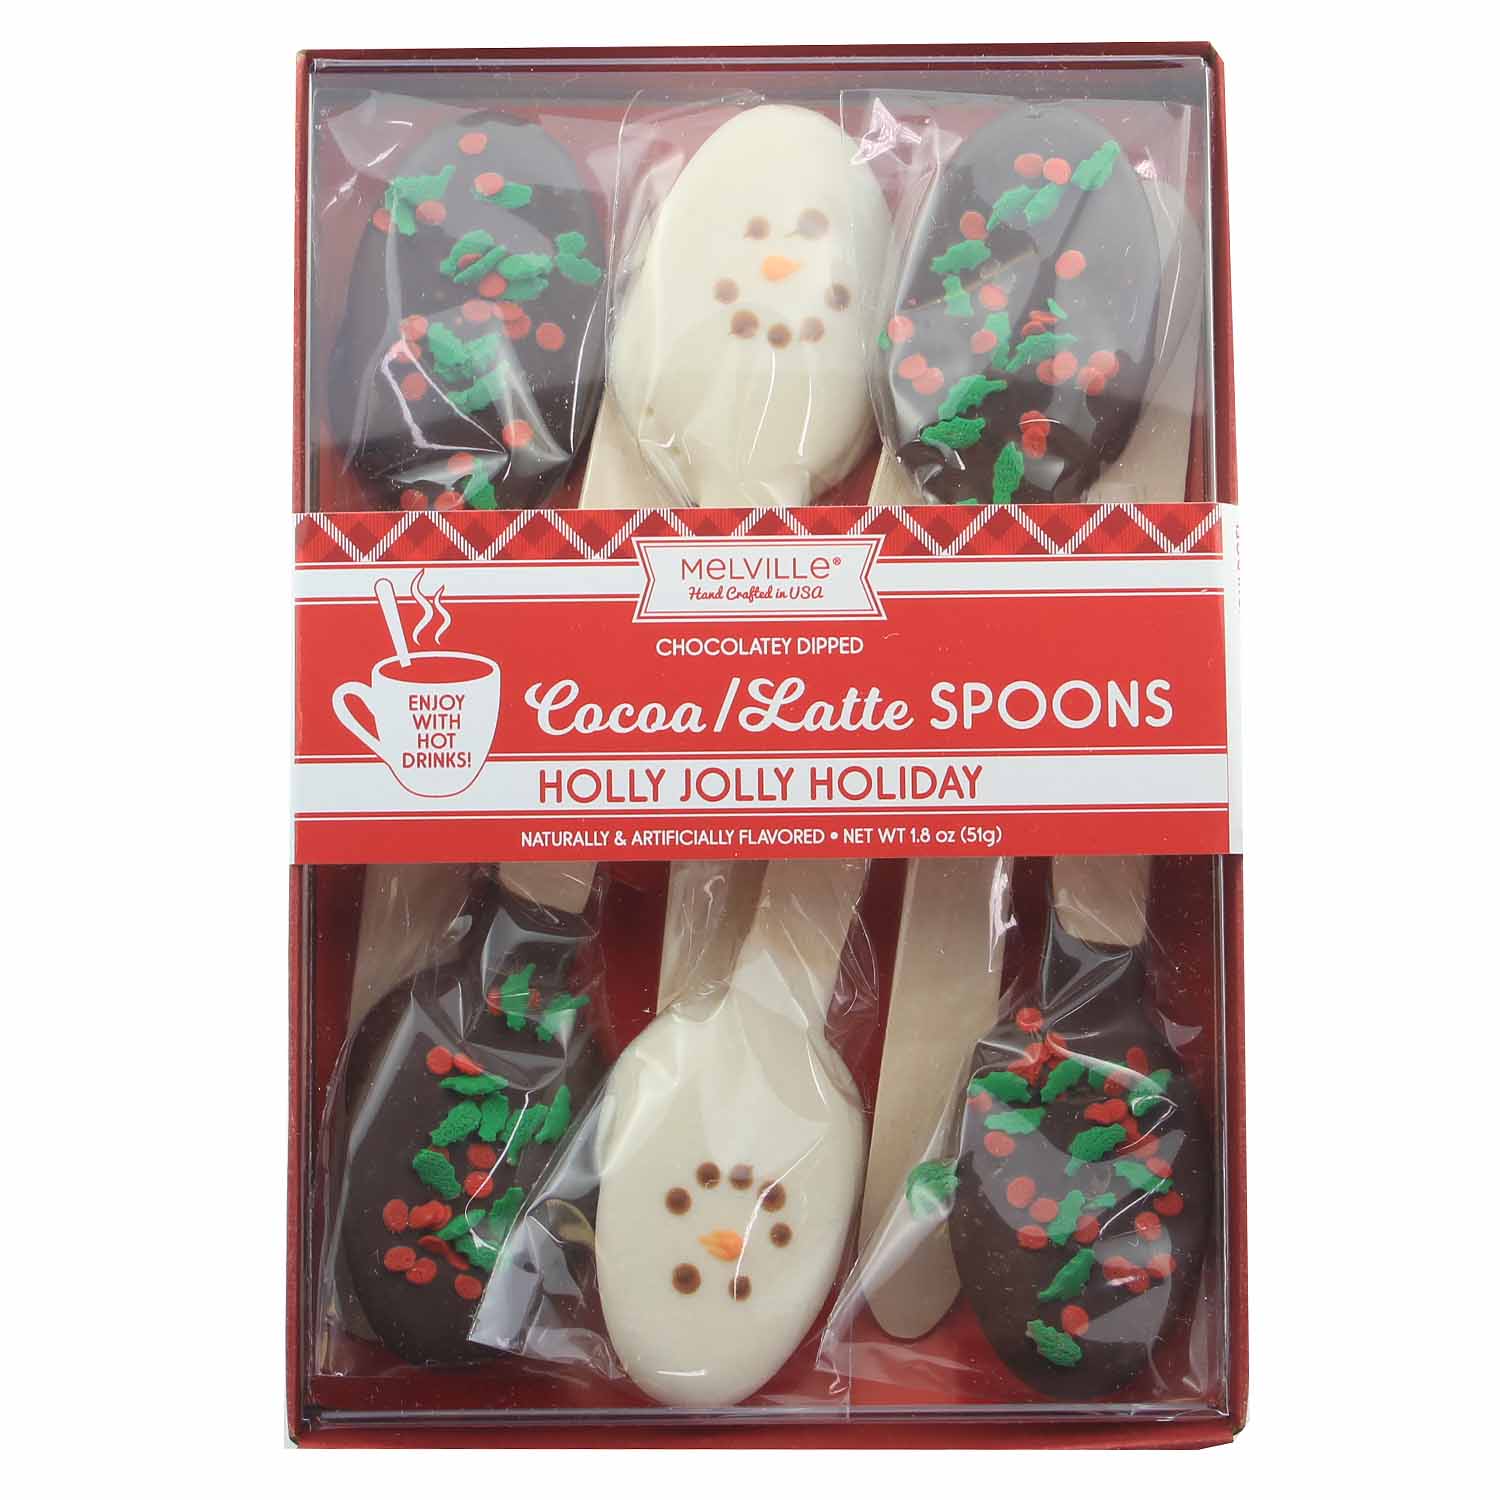 Holiday Chocolate Dipped Spoons